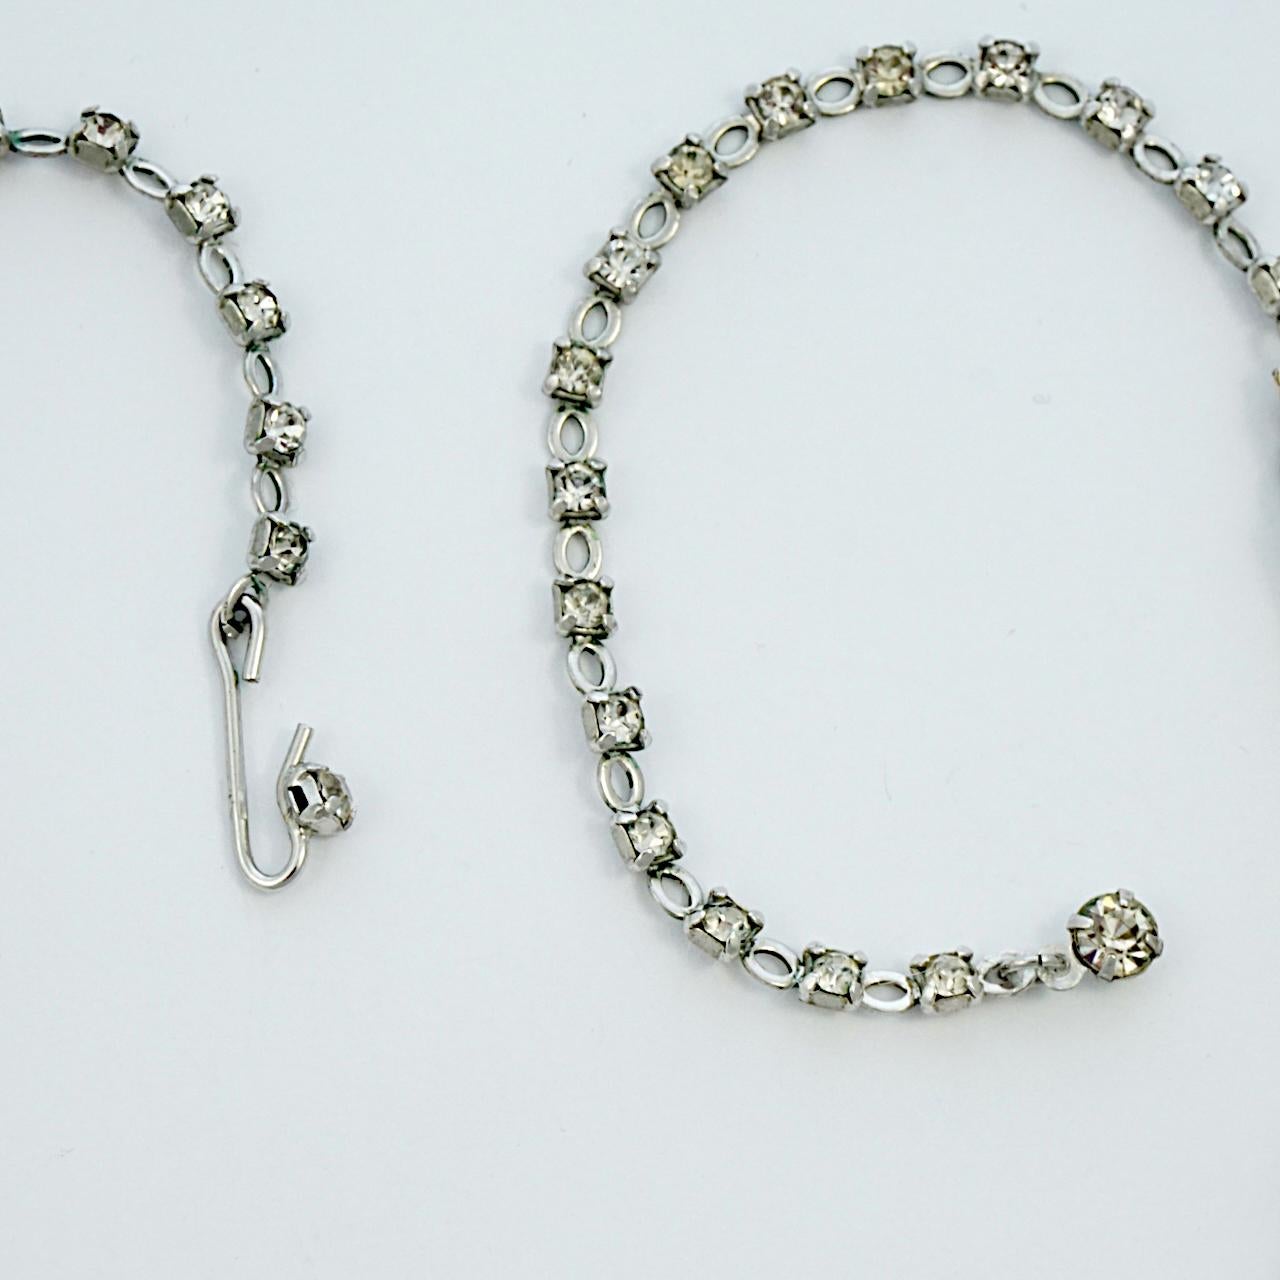 Silver Plated Bar Link Rhinestone Necklace circa 1950s For Sale 2